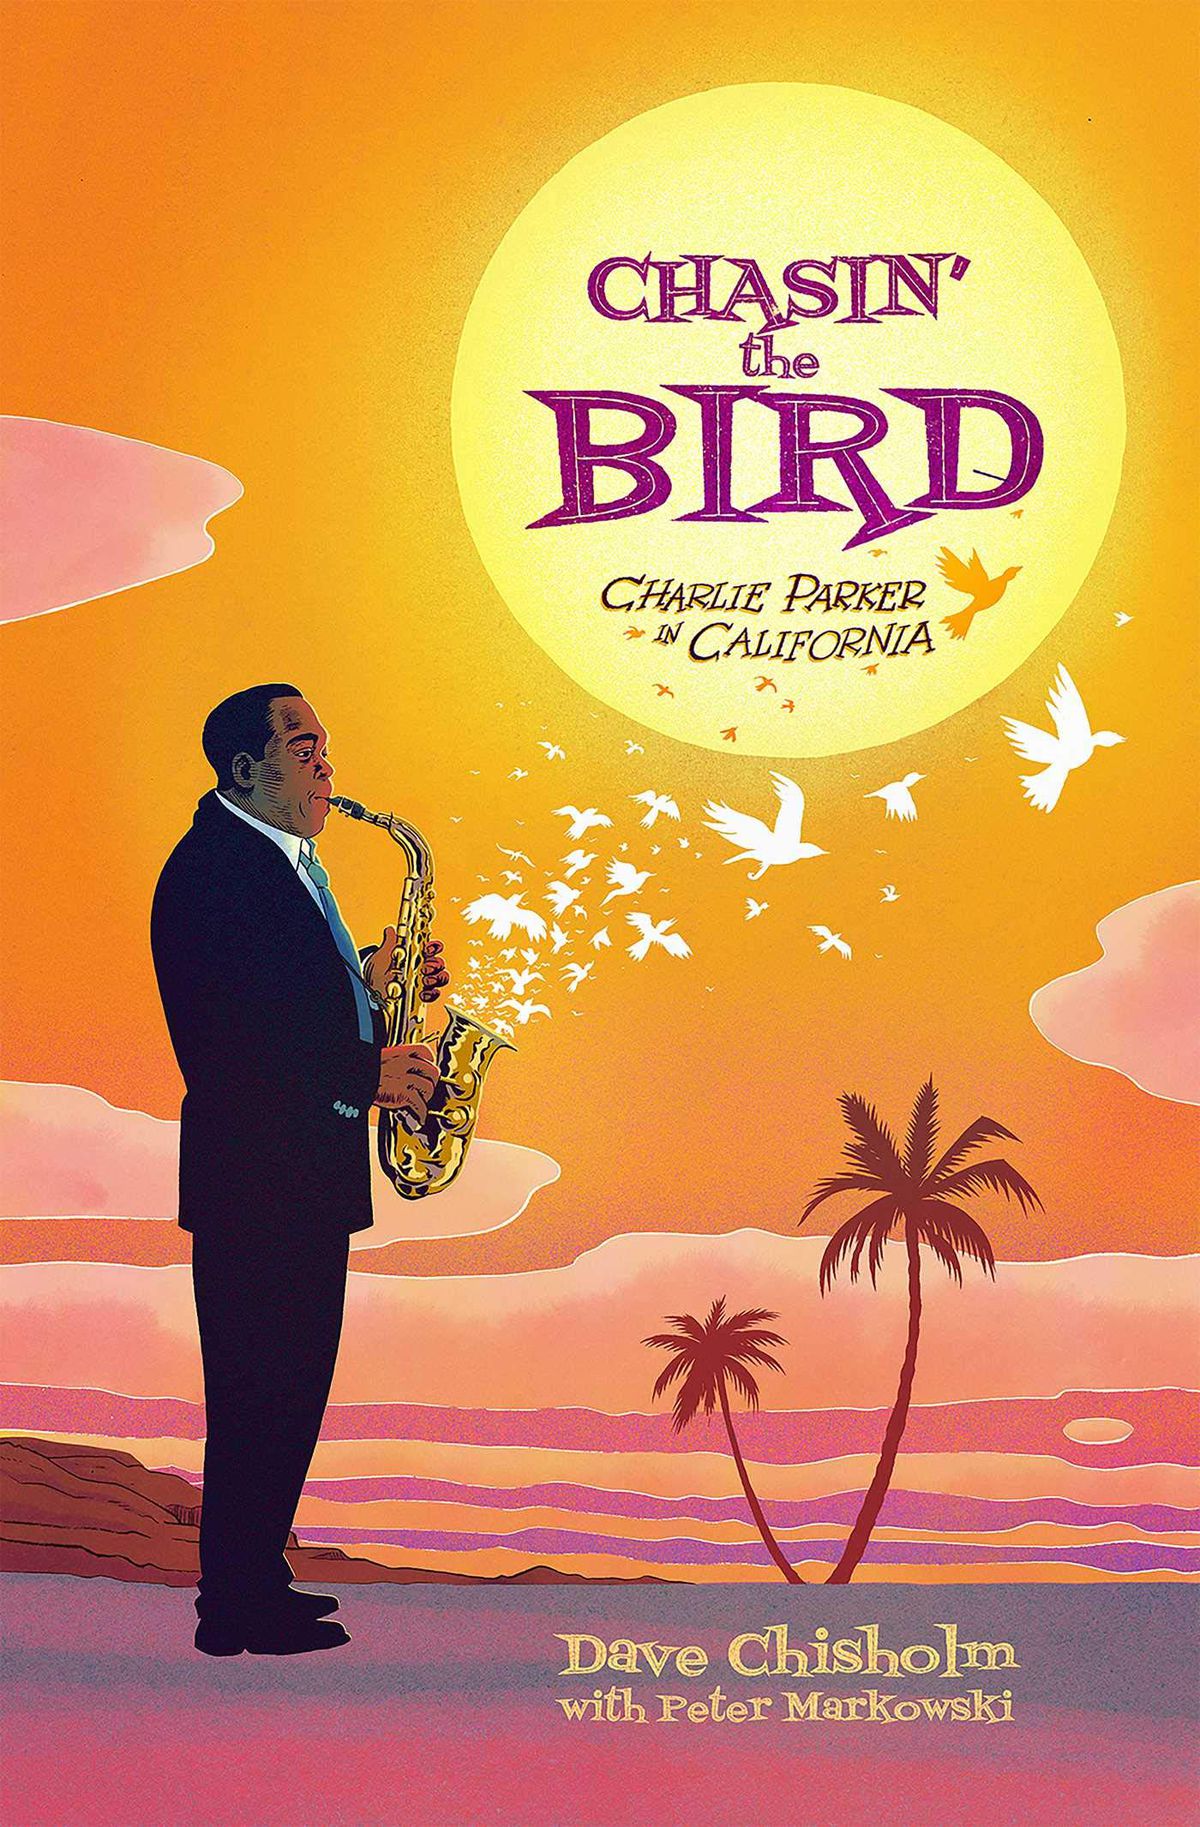 Charlie Parker plays saxophone in the desert, as white doves fly from its bell, on the cover of Chasin’ the Bird: Charlie Parker in California (2020).